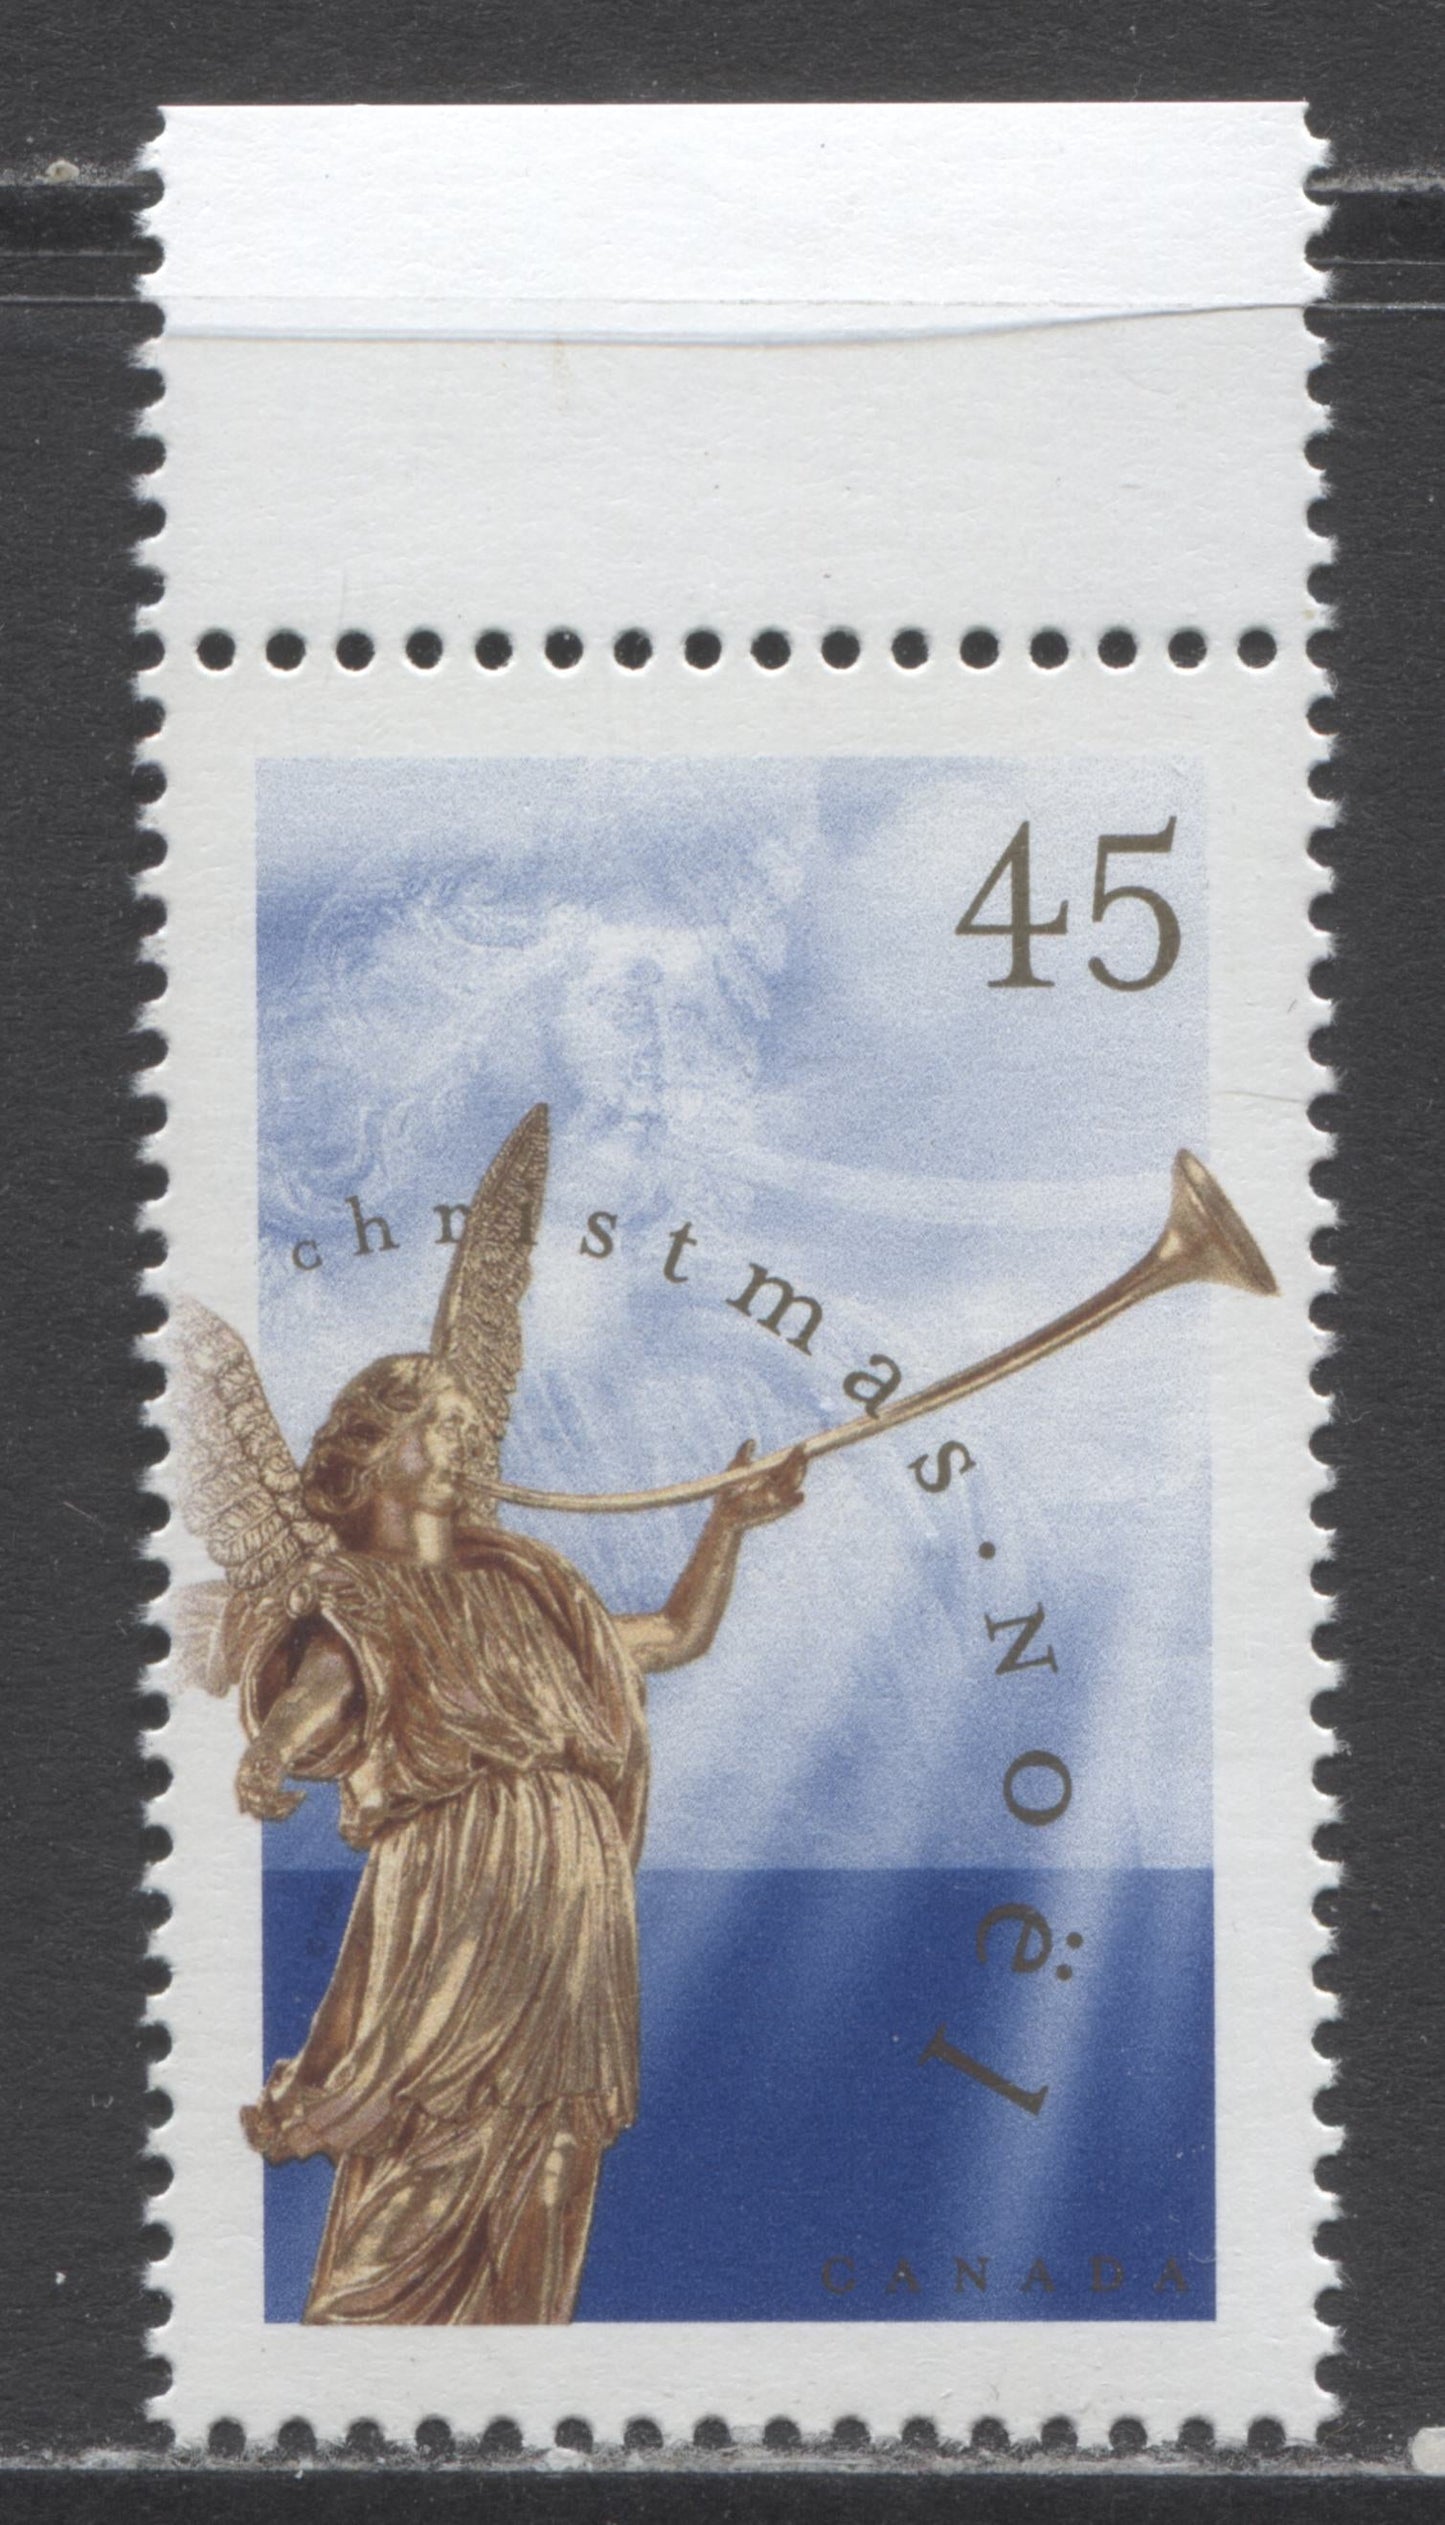 Lot 253 Canada #1764b 45c Multicolored (Blue) Angel Of The Last Judgement, 1998 Christmas Issue, A VFNH Single Showing The Rare Perf 13.1 x 13.6, Fewer Than 500 Exist